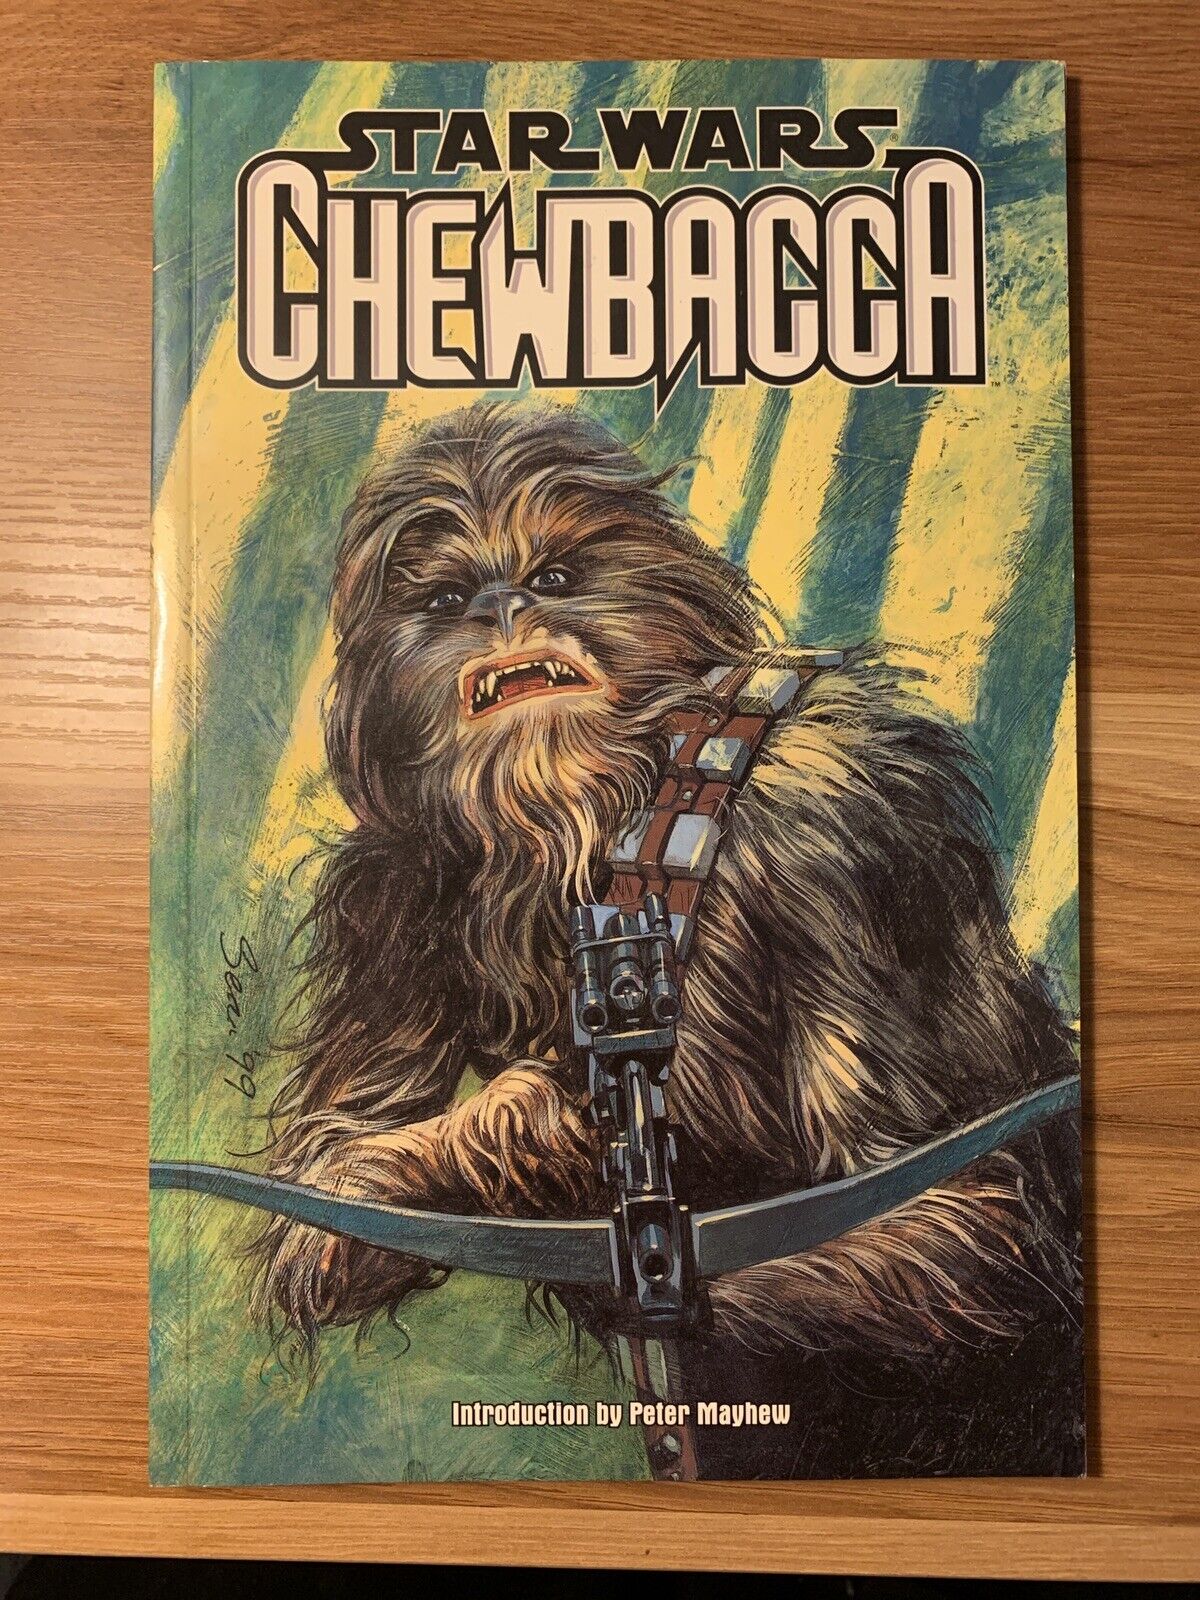 Star Wars: Chewbacca - Dark Horse Comics Paperback - Page Signed By Peter Mayhew